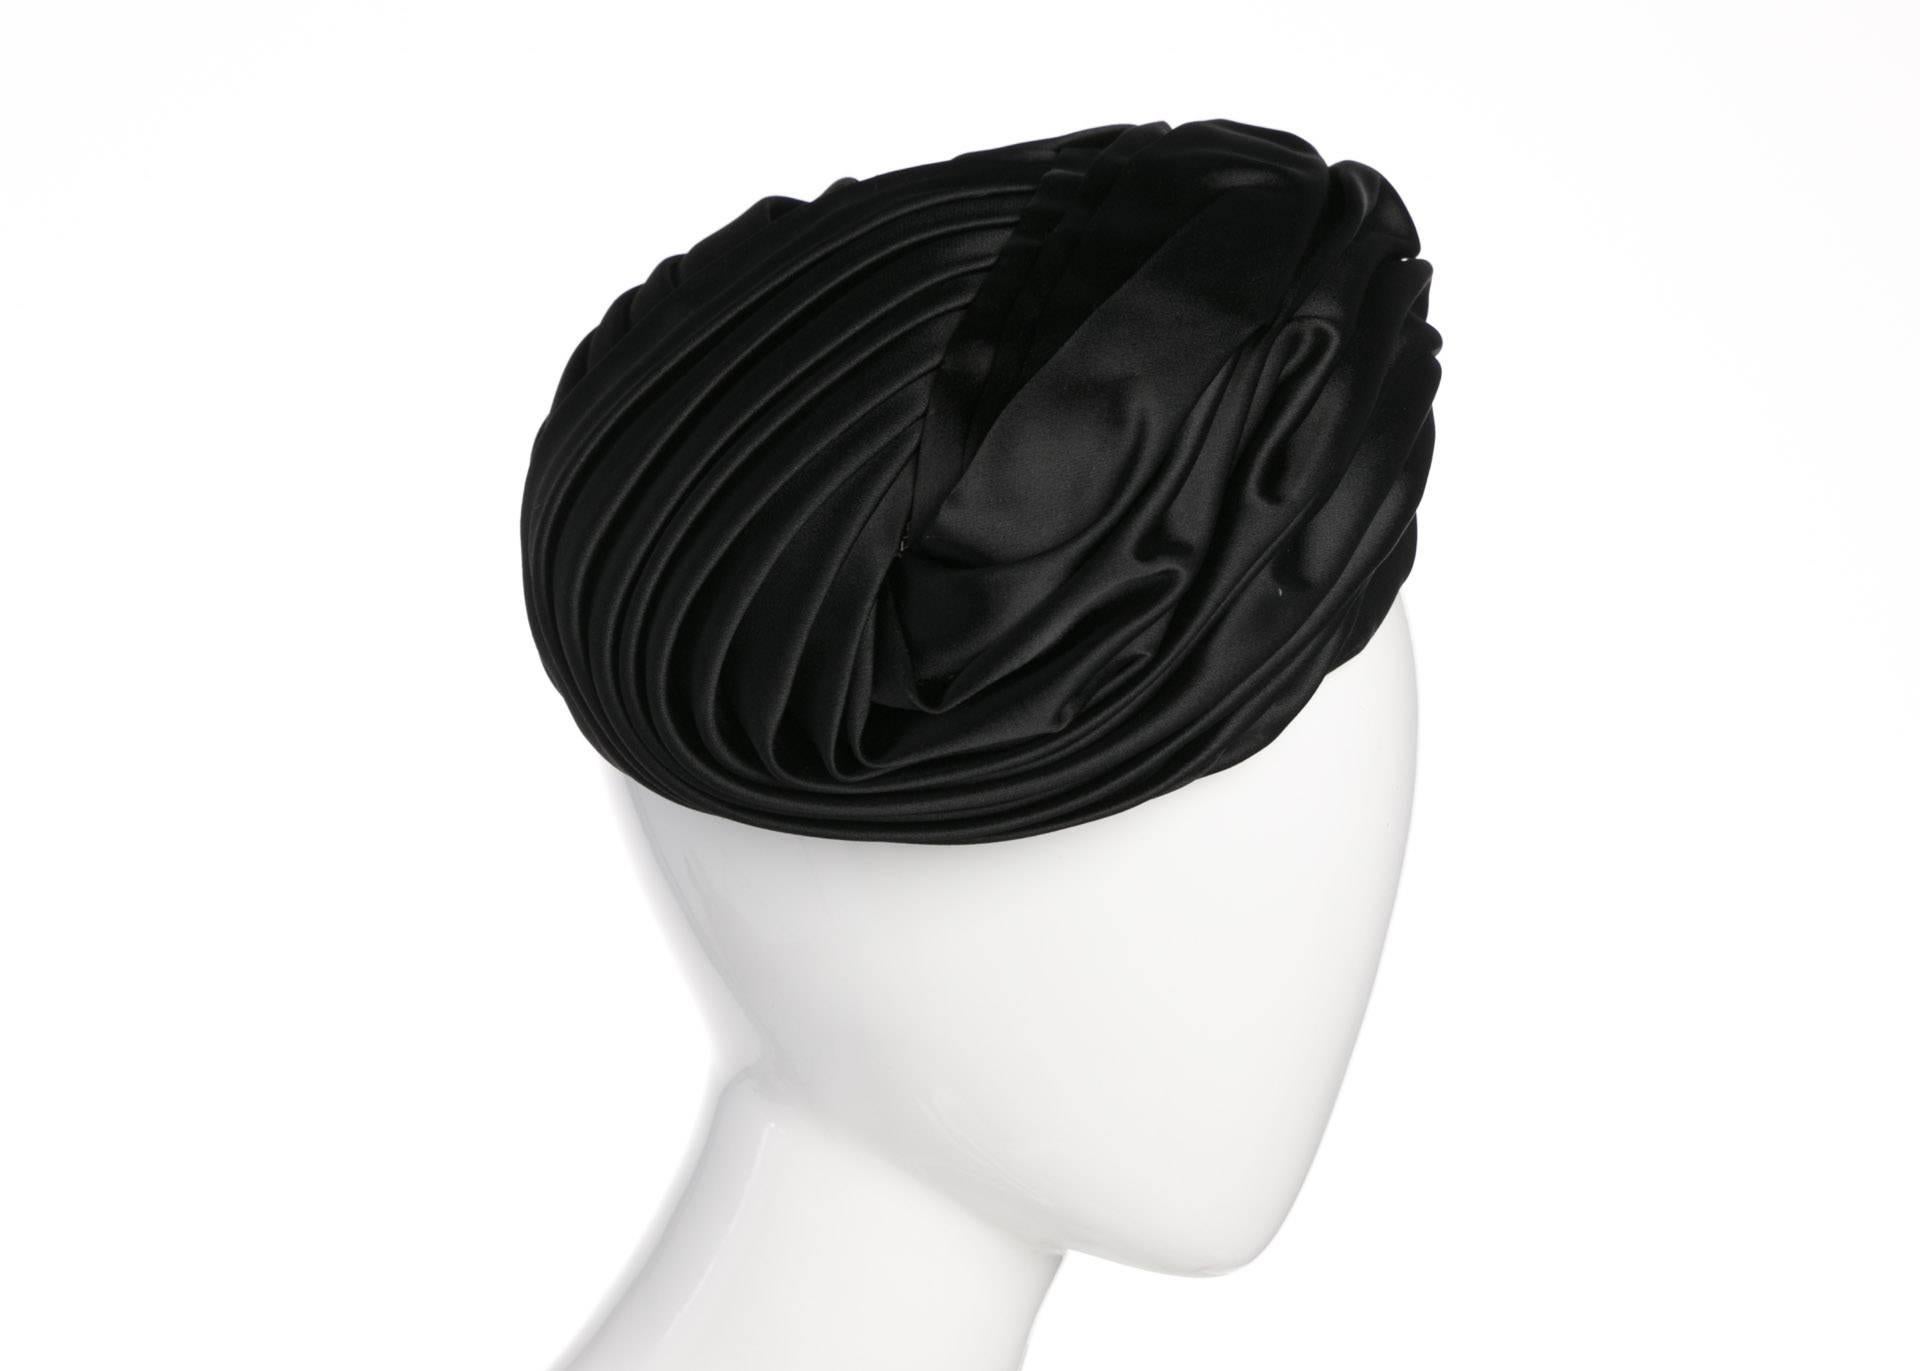 Turban style hats have been incorporated into western fashion since British aesthetes began questioning restrictive dress during the 19th century. During the mid-20th century, everyone from Queen Elizabeth to Audrey Hepburn wore variations on this